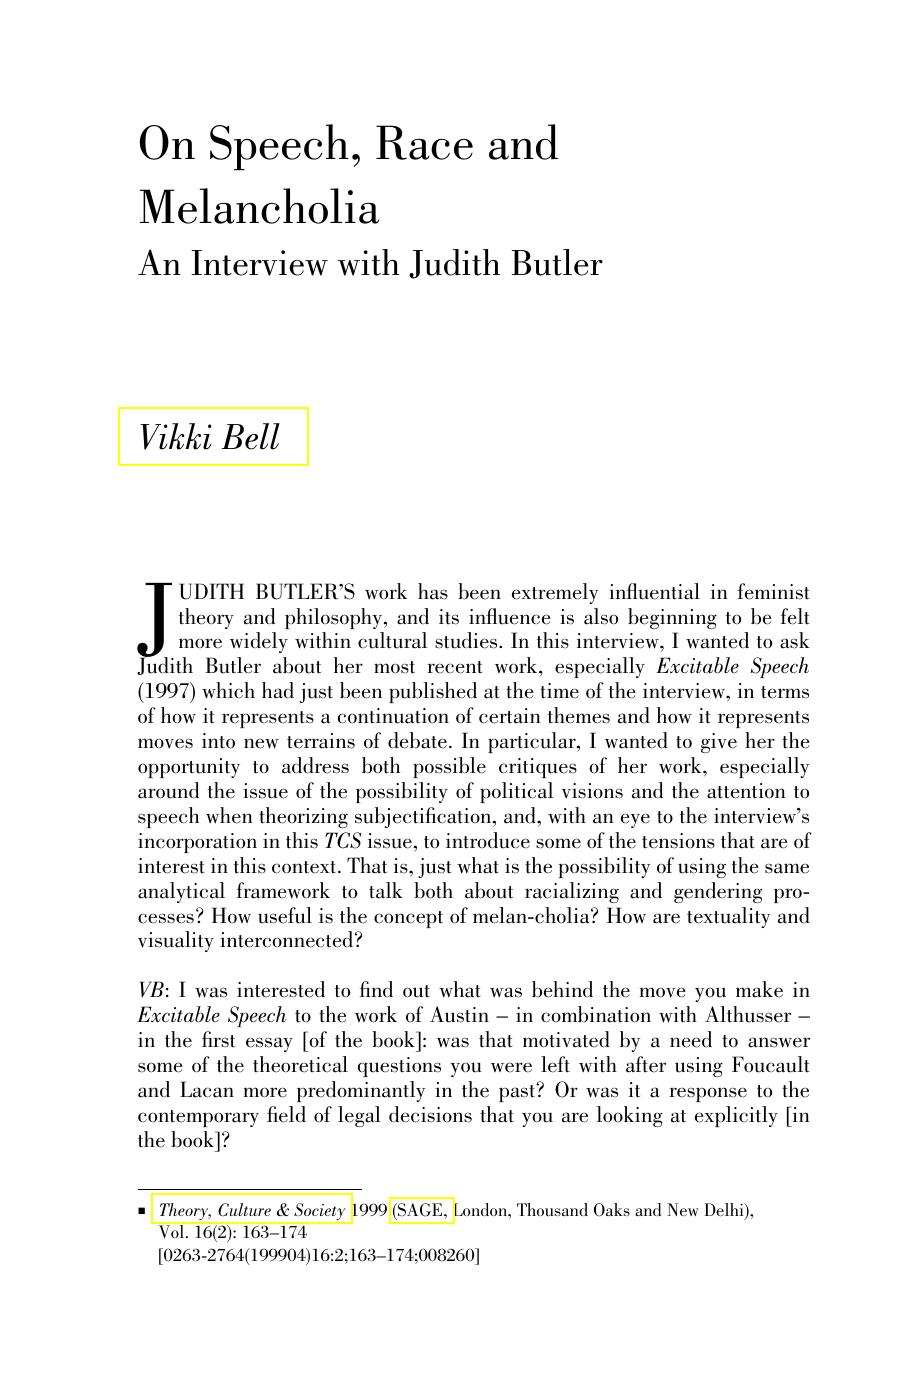 On Speech, Race and Melancholia: An Interview with Judith Butler